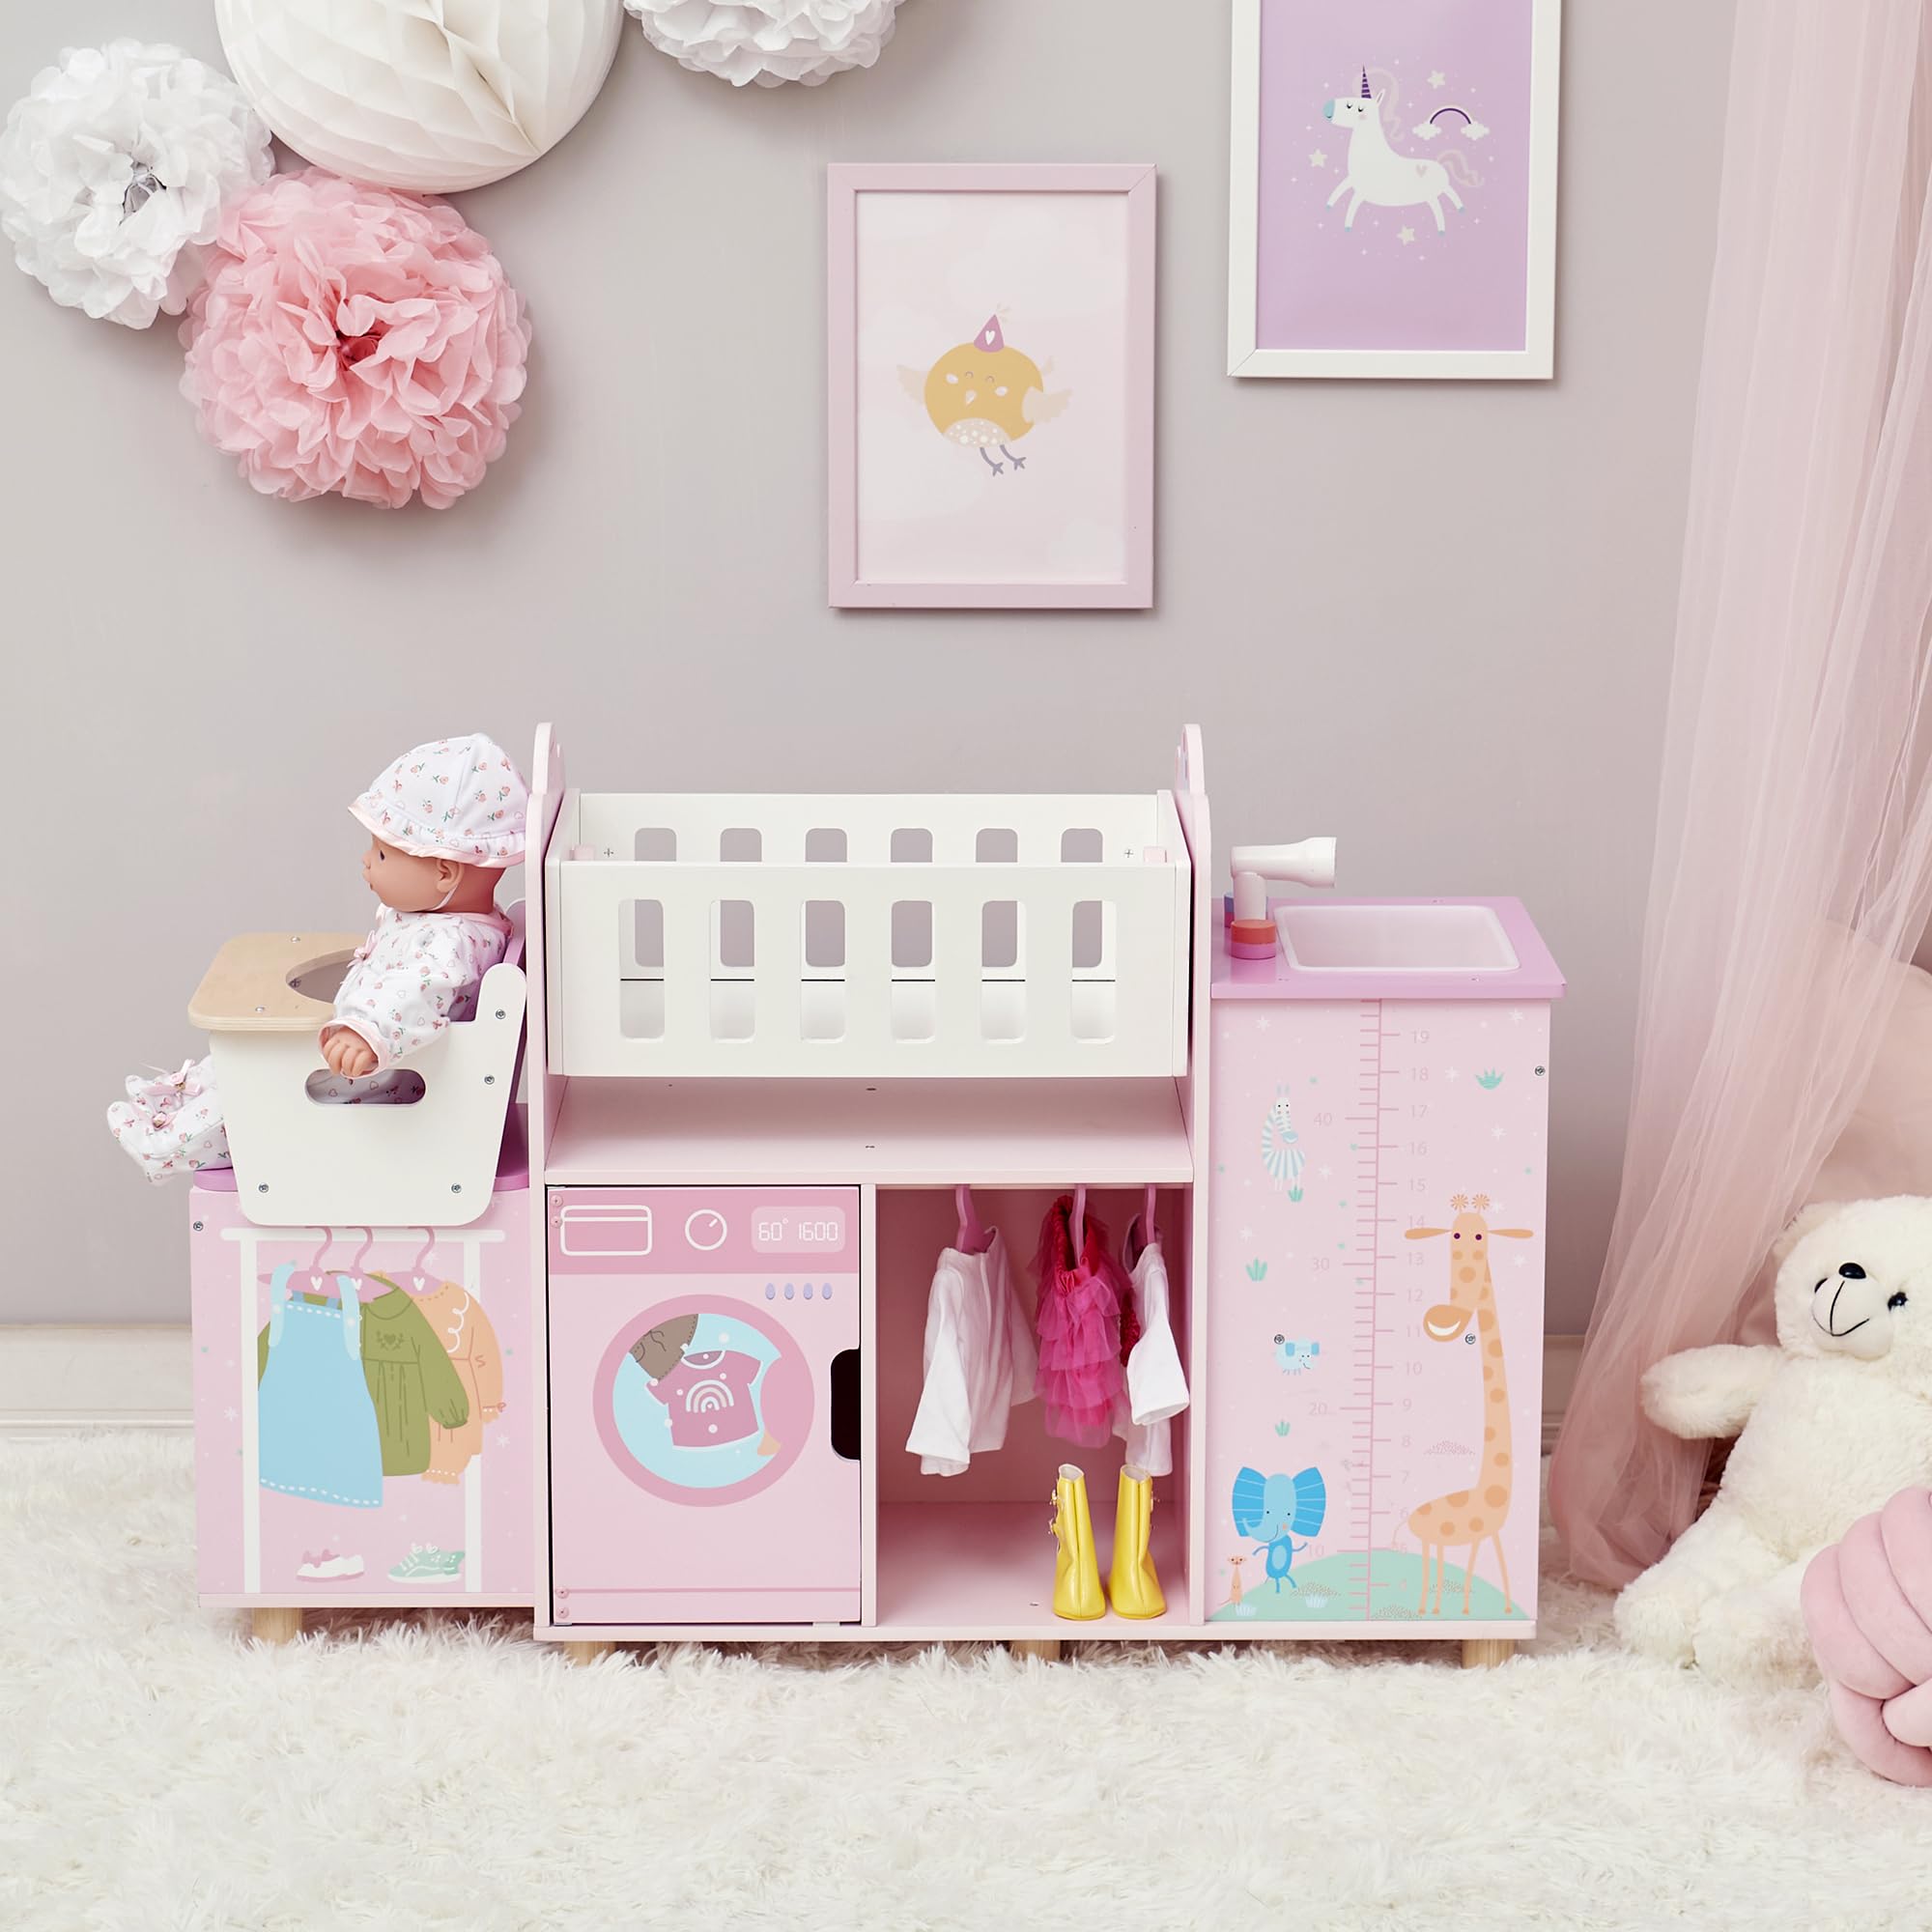 Olivia's Little World - Baby Doll Nursery Station Amanda Playset with Clothing Hangers, Detachable Highchair, Rocking Cradle, Washing Machine, Role Play Nursery Center with Storage, Baby Pink, Ages 3+